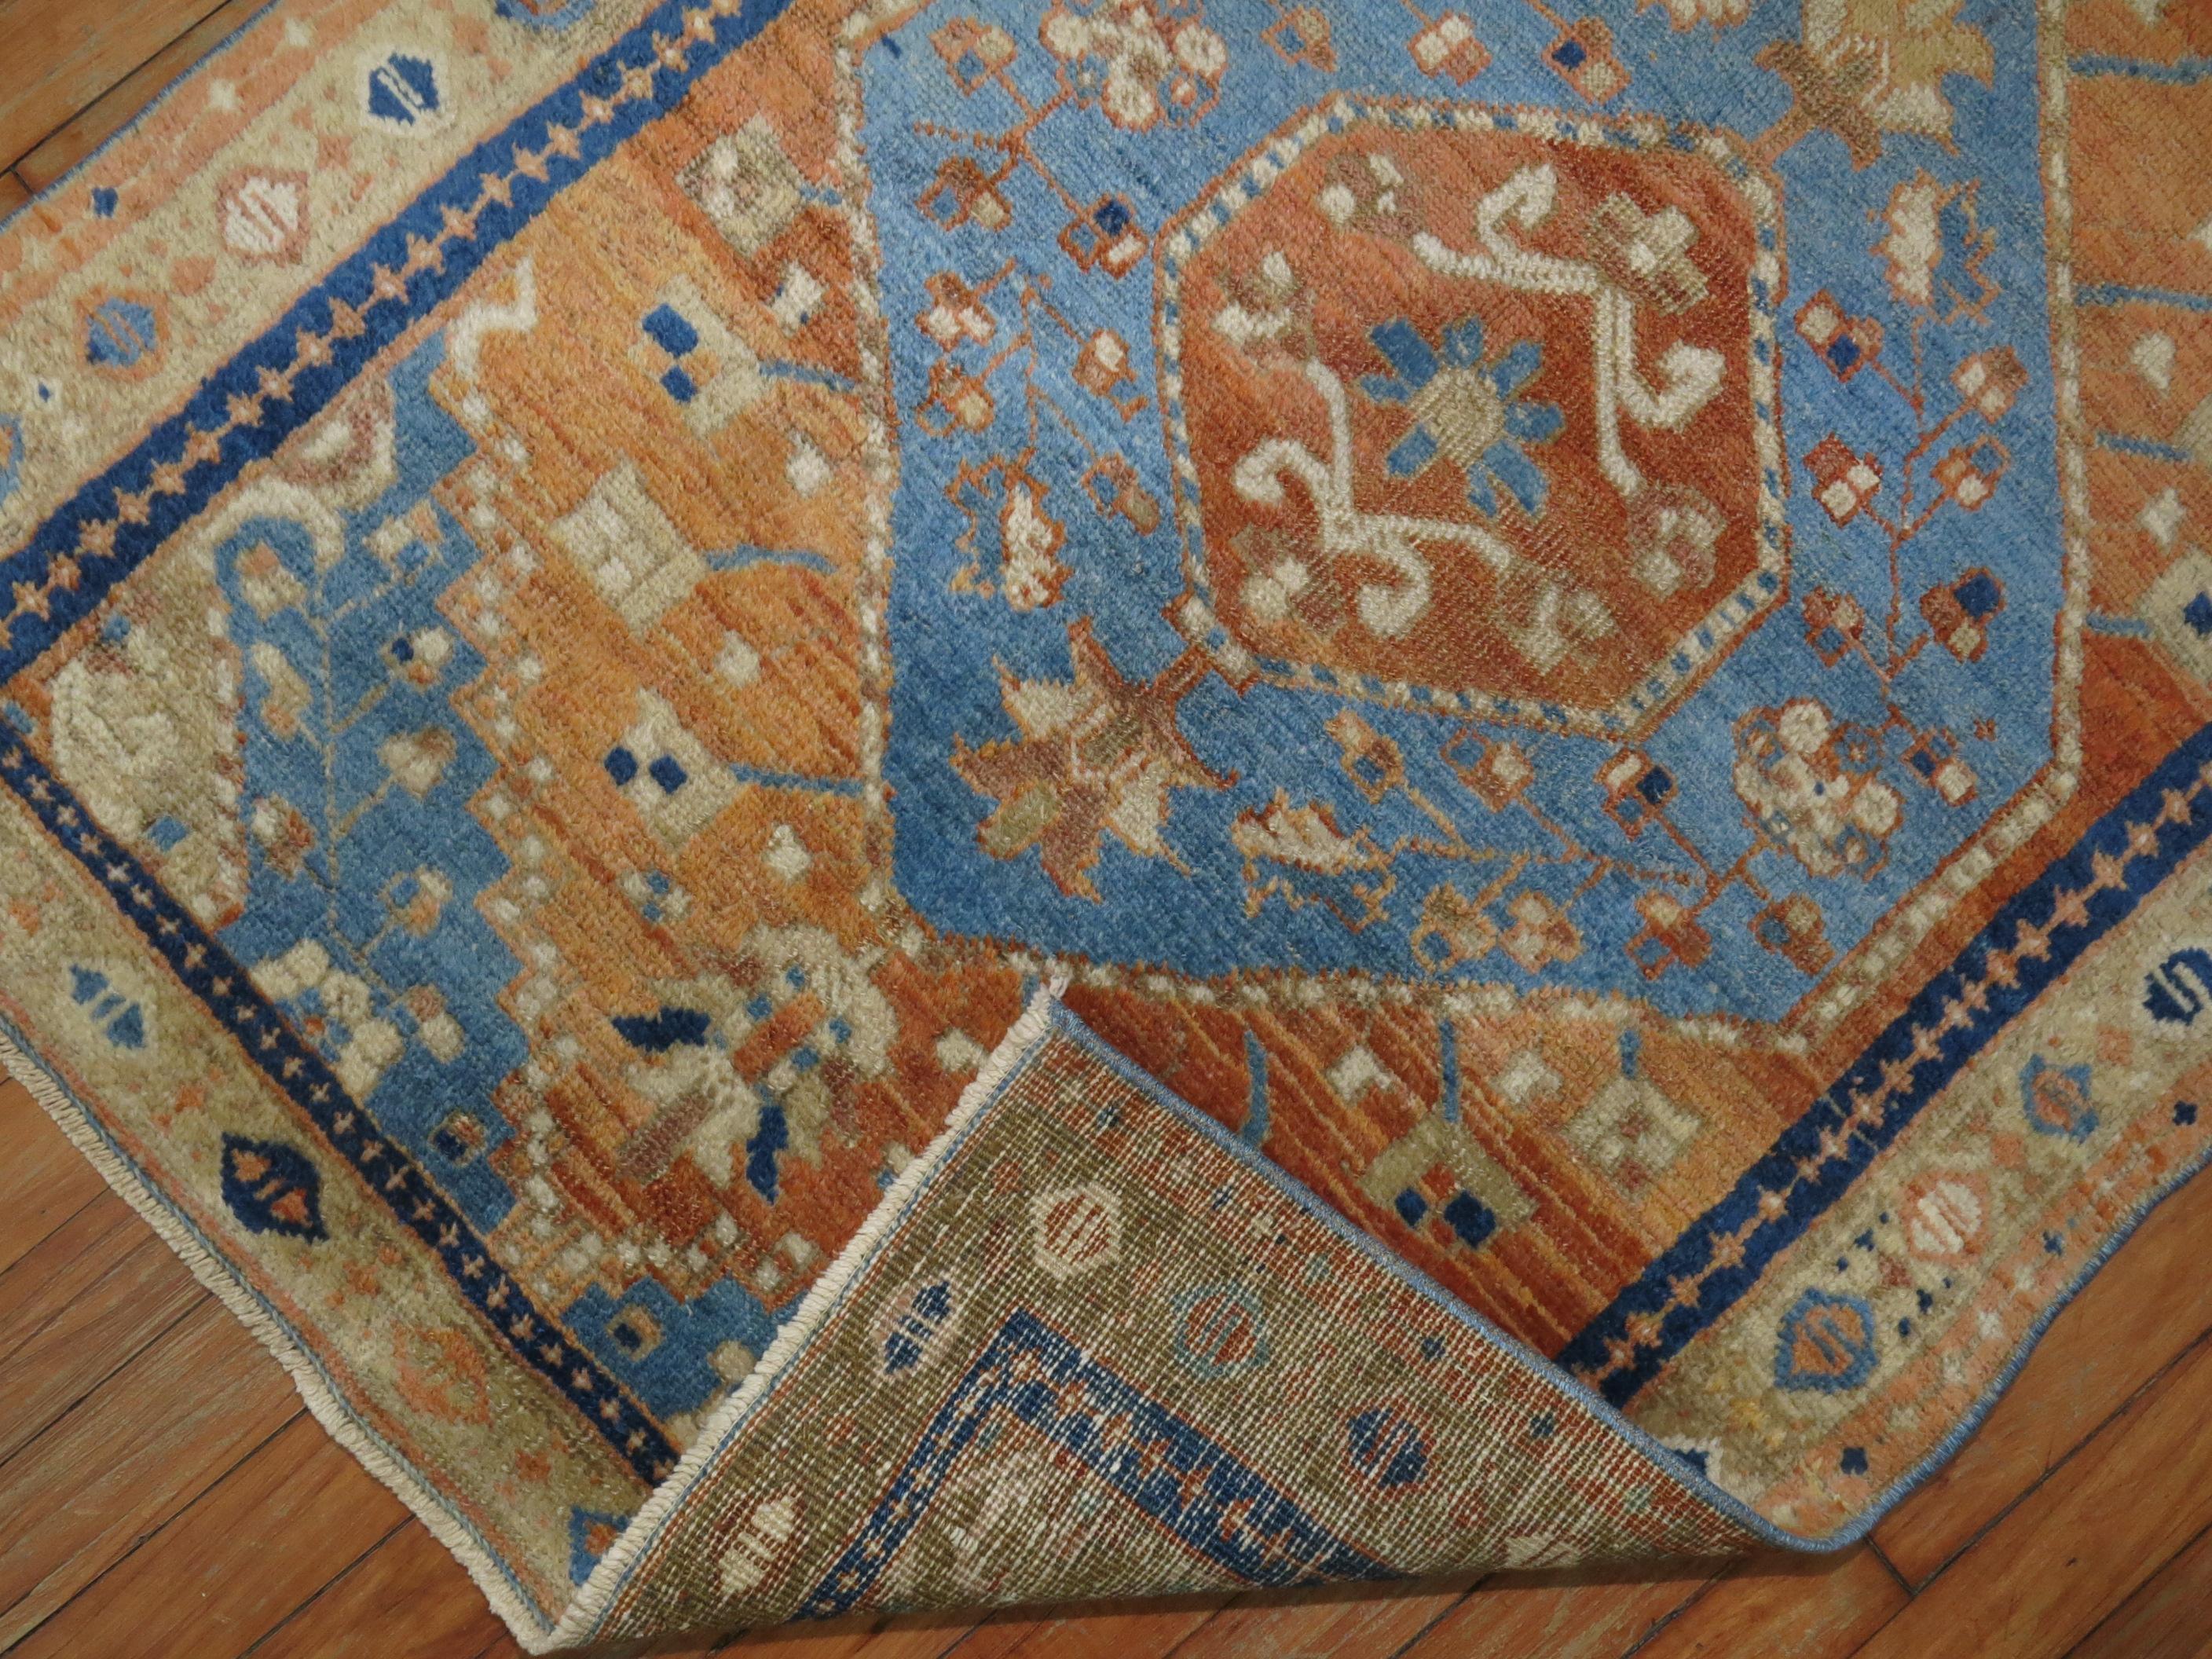 Colorful antique Persian Heriz rug featuring accents in orange and sky blue.